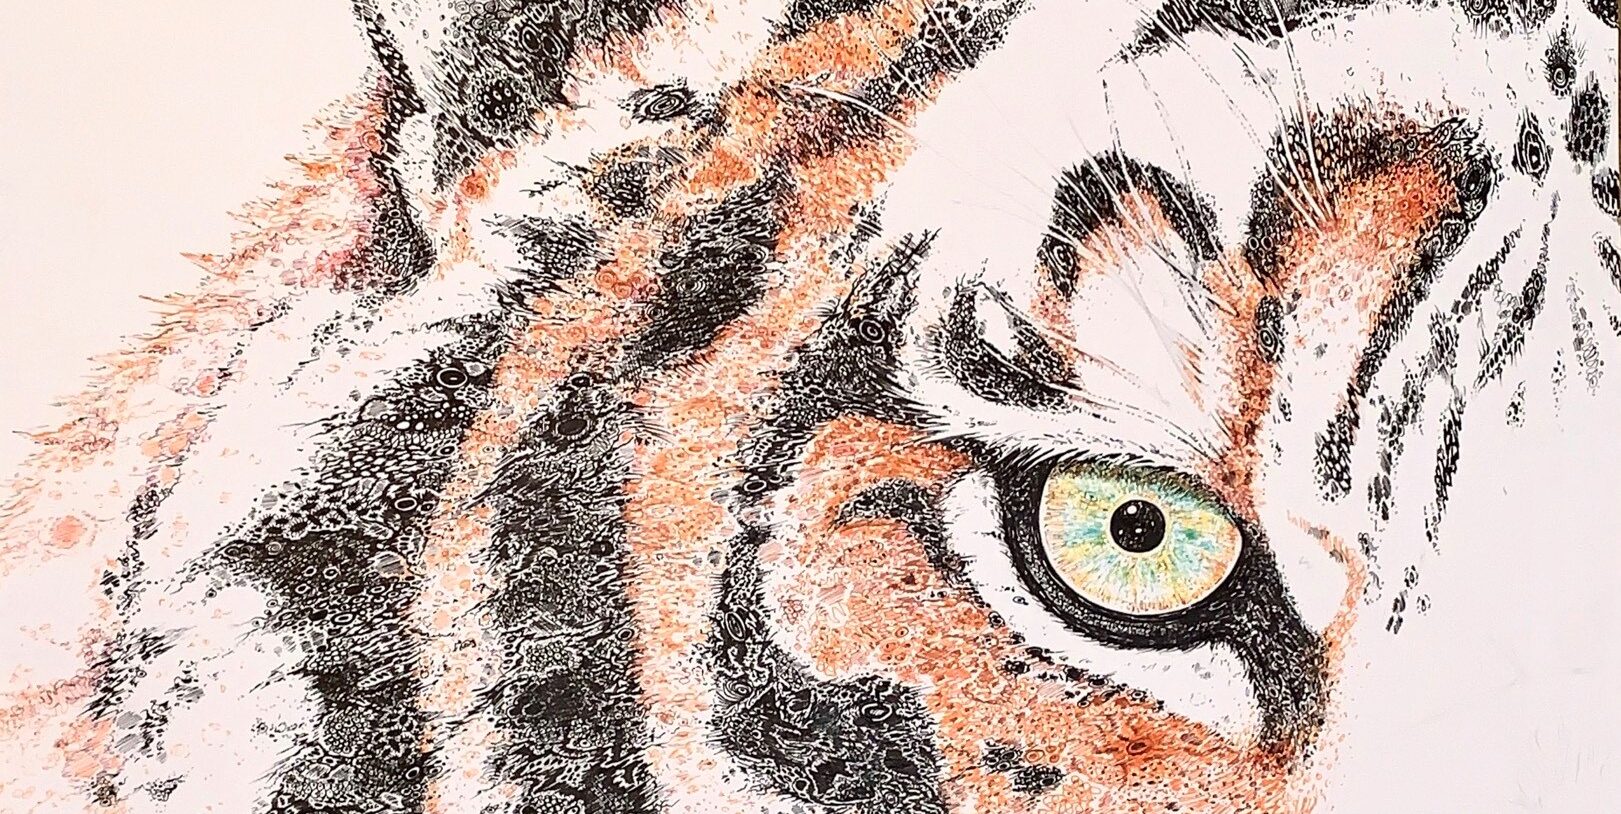 Cropped image of "Molecular Tiger" by Holly Goodwin. An illustration of half of a tiger's face with molecular shapes woven into the drawing.